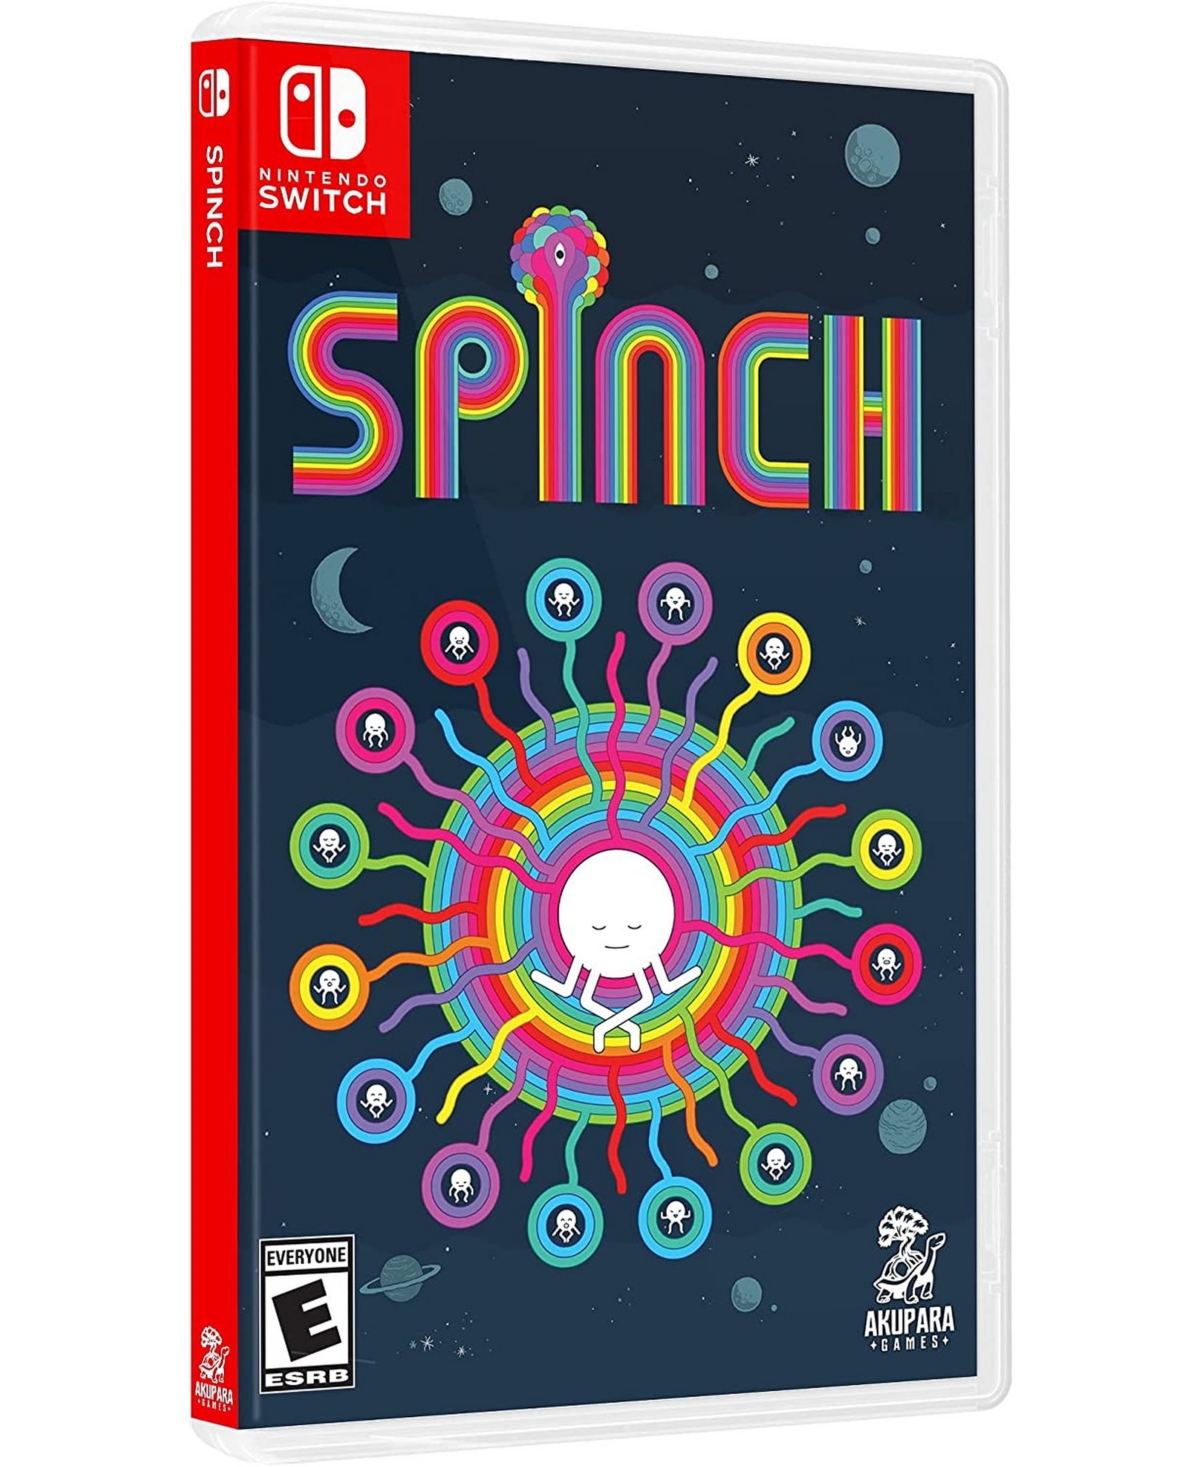 Nintendo Spinch [physical Standard Edition] - Switch